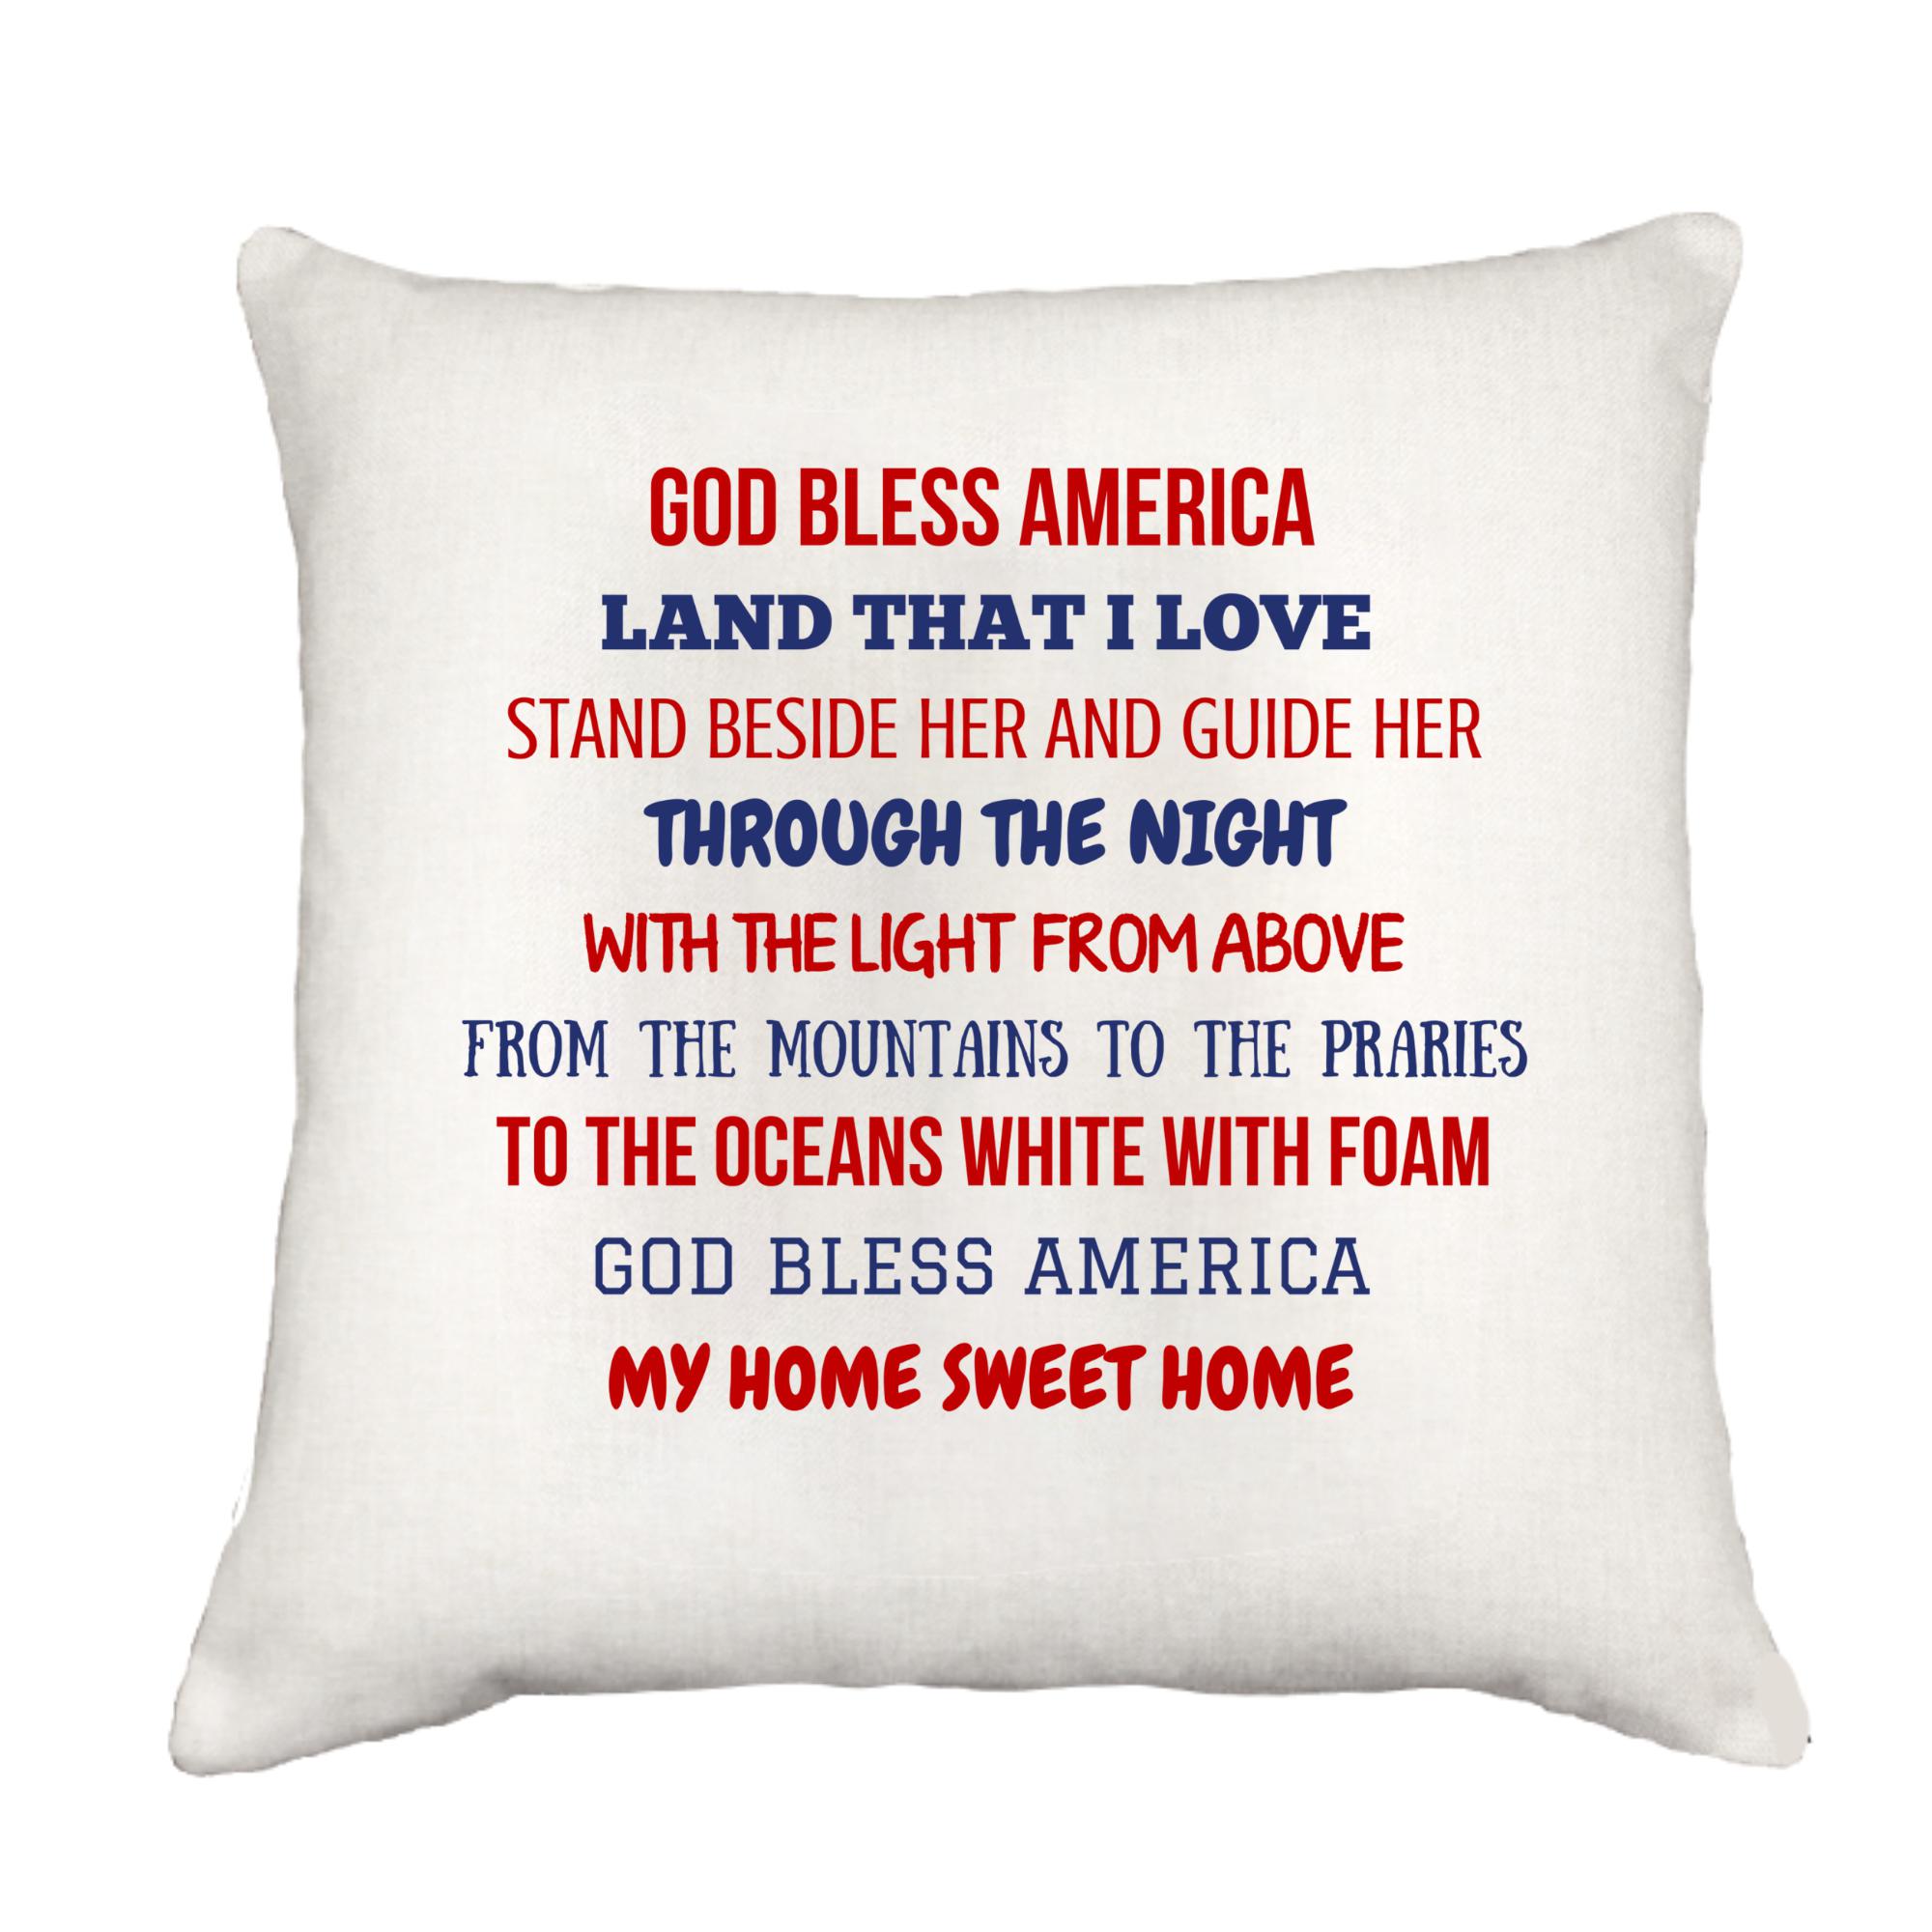 God Bless America Cottage Pillow Throw/Decorative Pillow - Southern Sisters